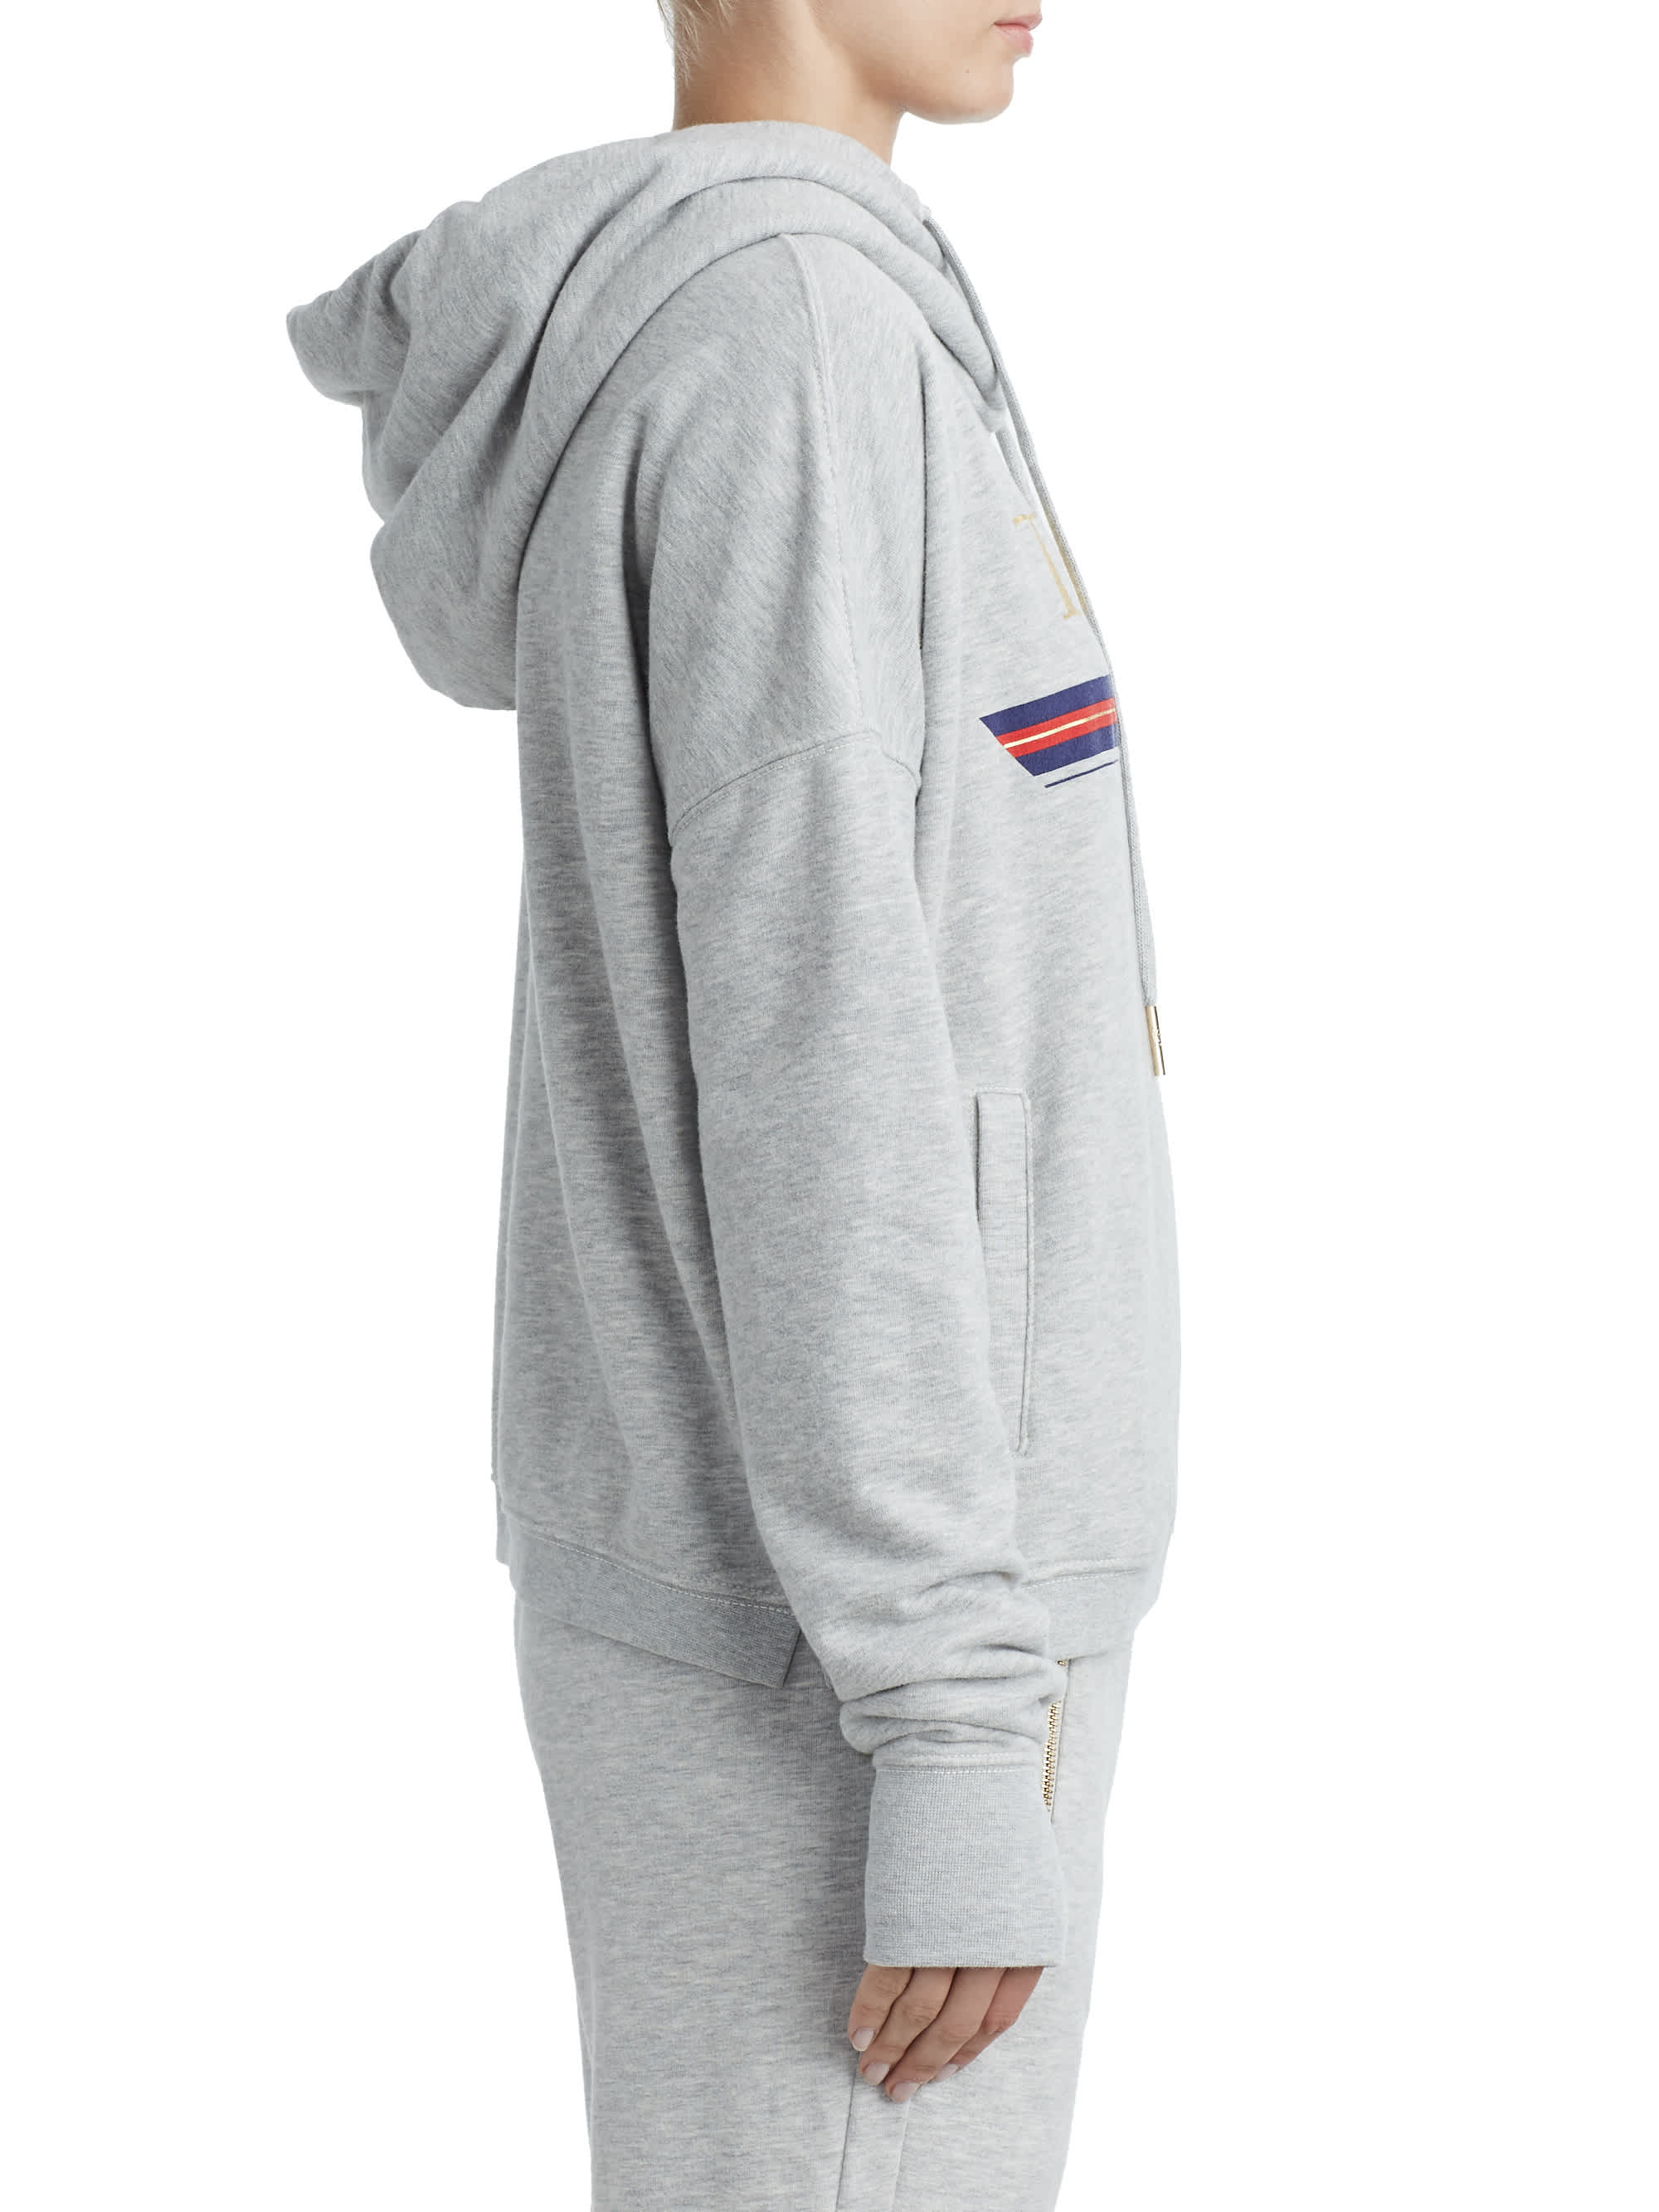 WOMENS STRIPED LOGO PULLOVER HOODIE